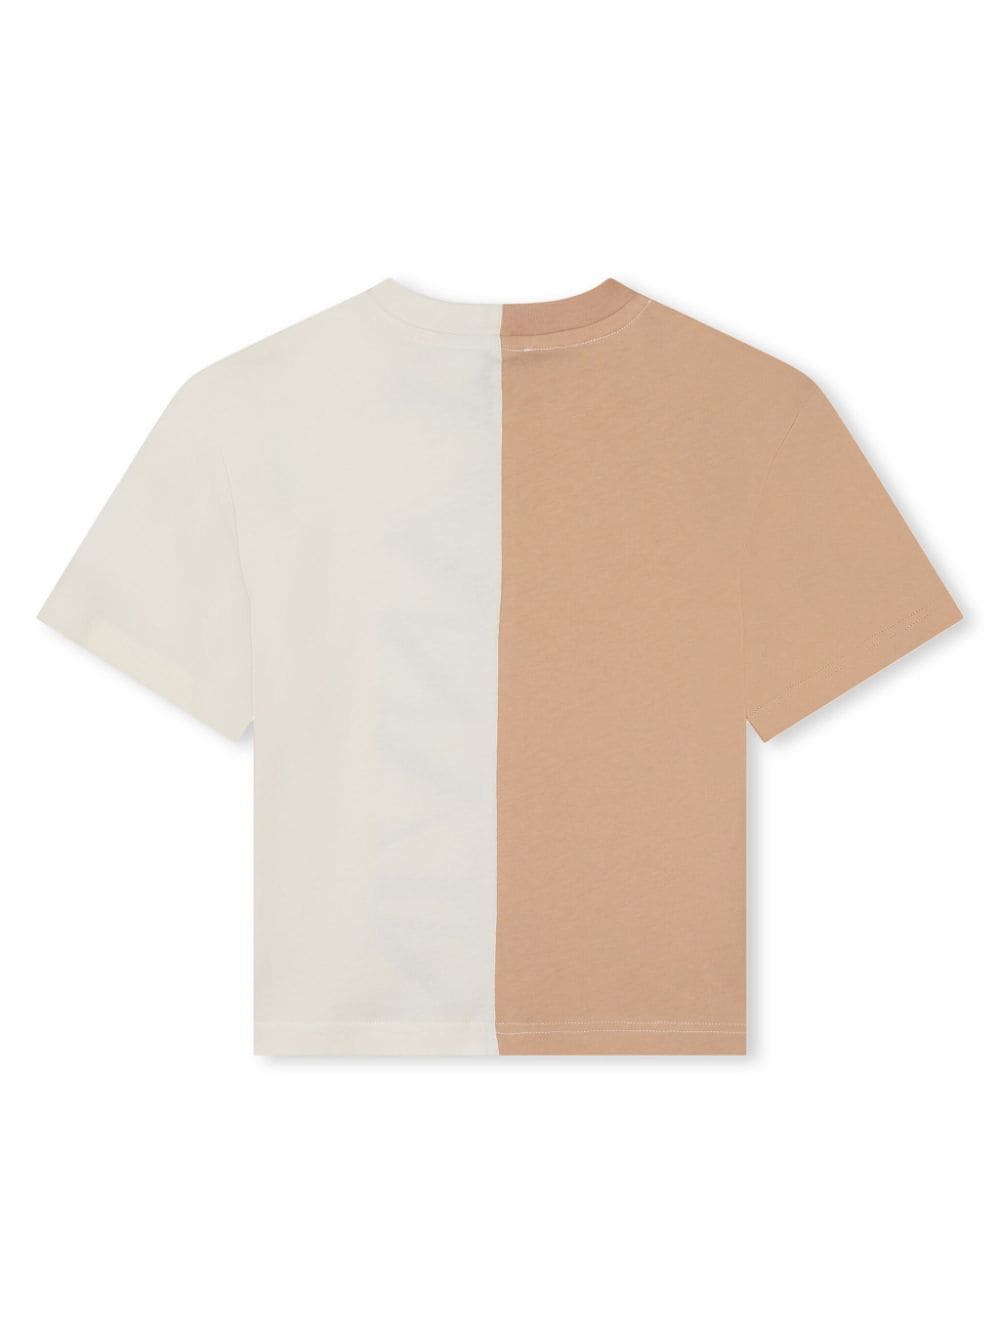 Brown and beige t-shirt for boys with logo